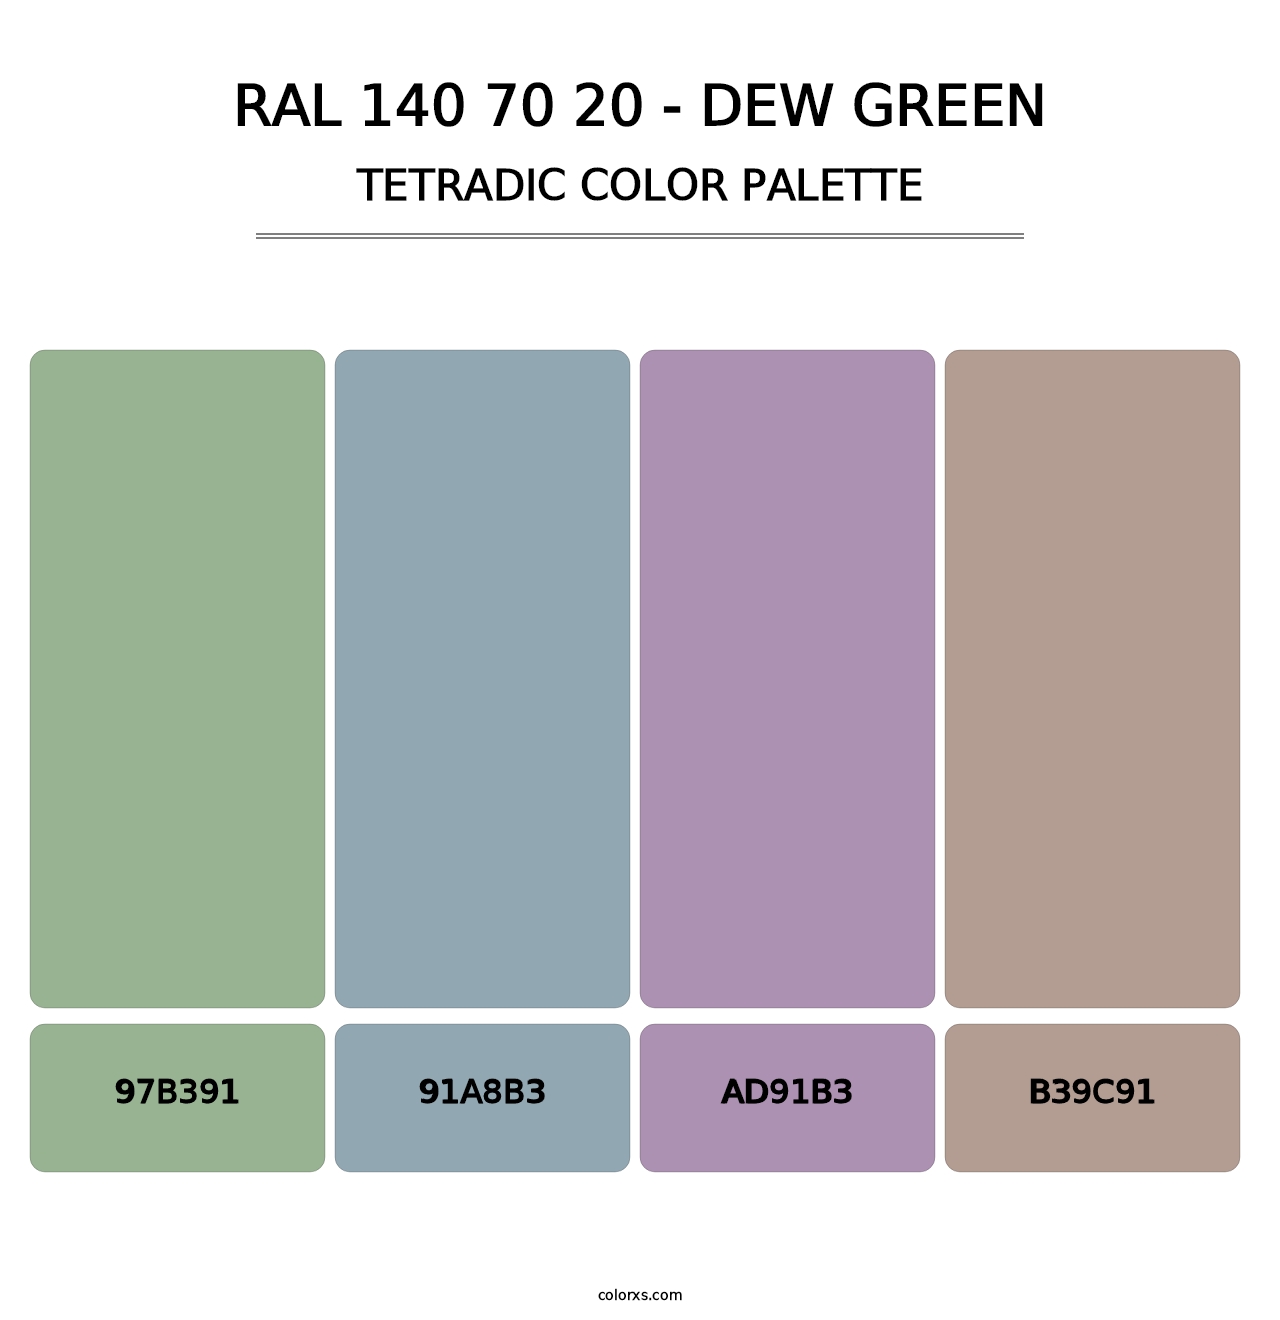 RAL 140 70 20 - Dew Green - Tetradic Color Palette